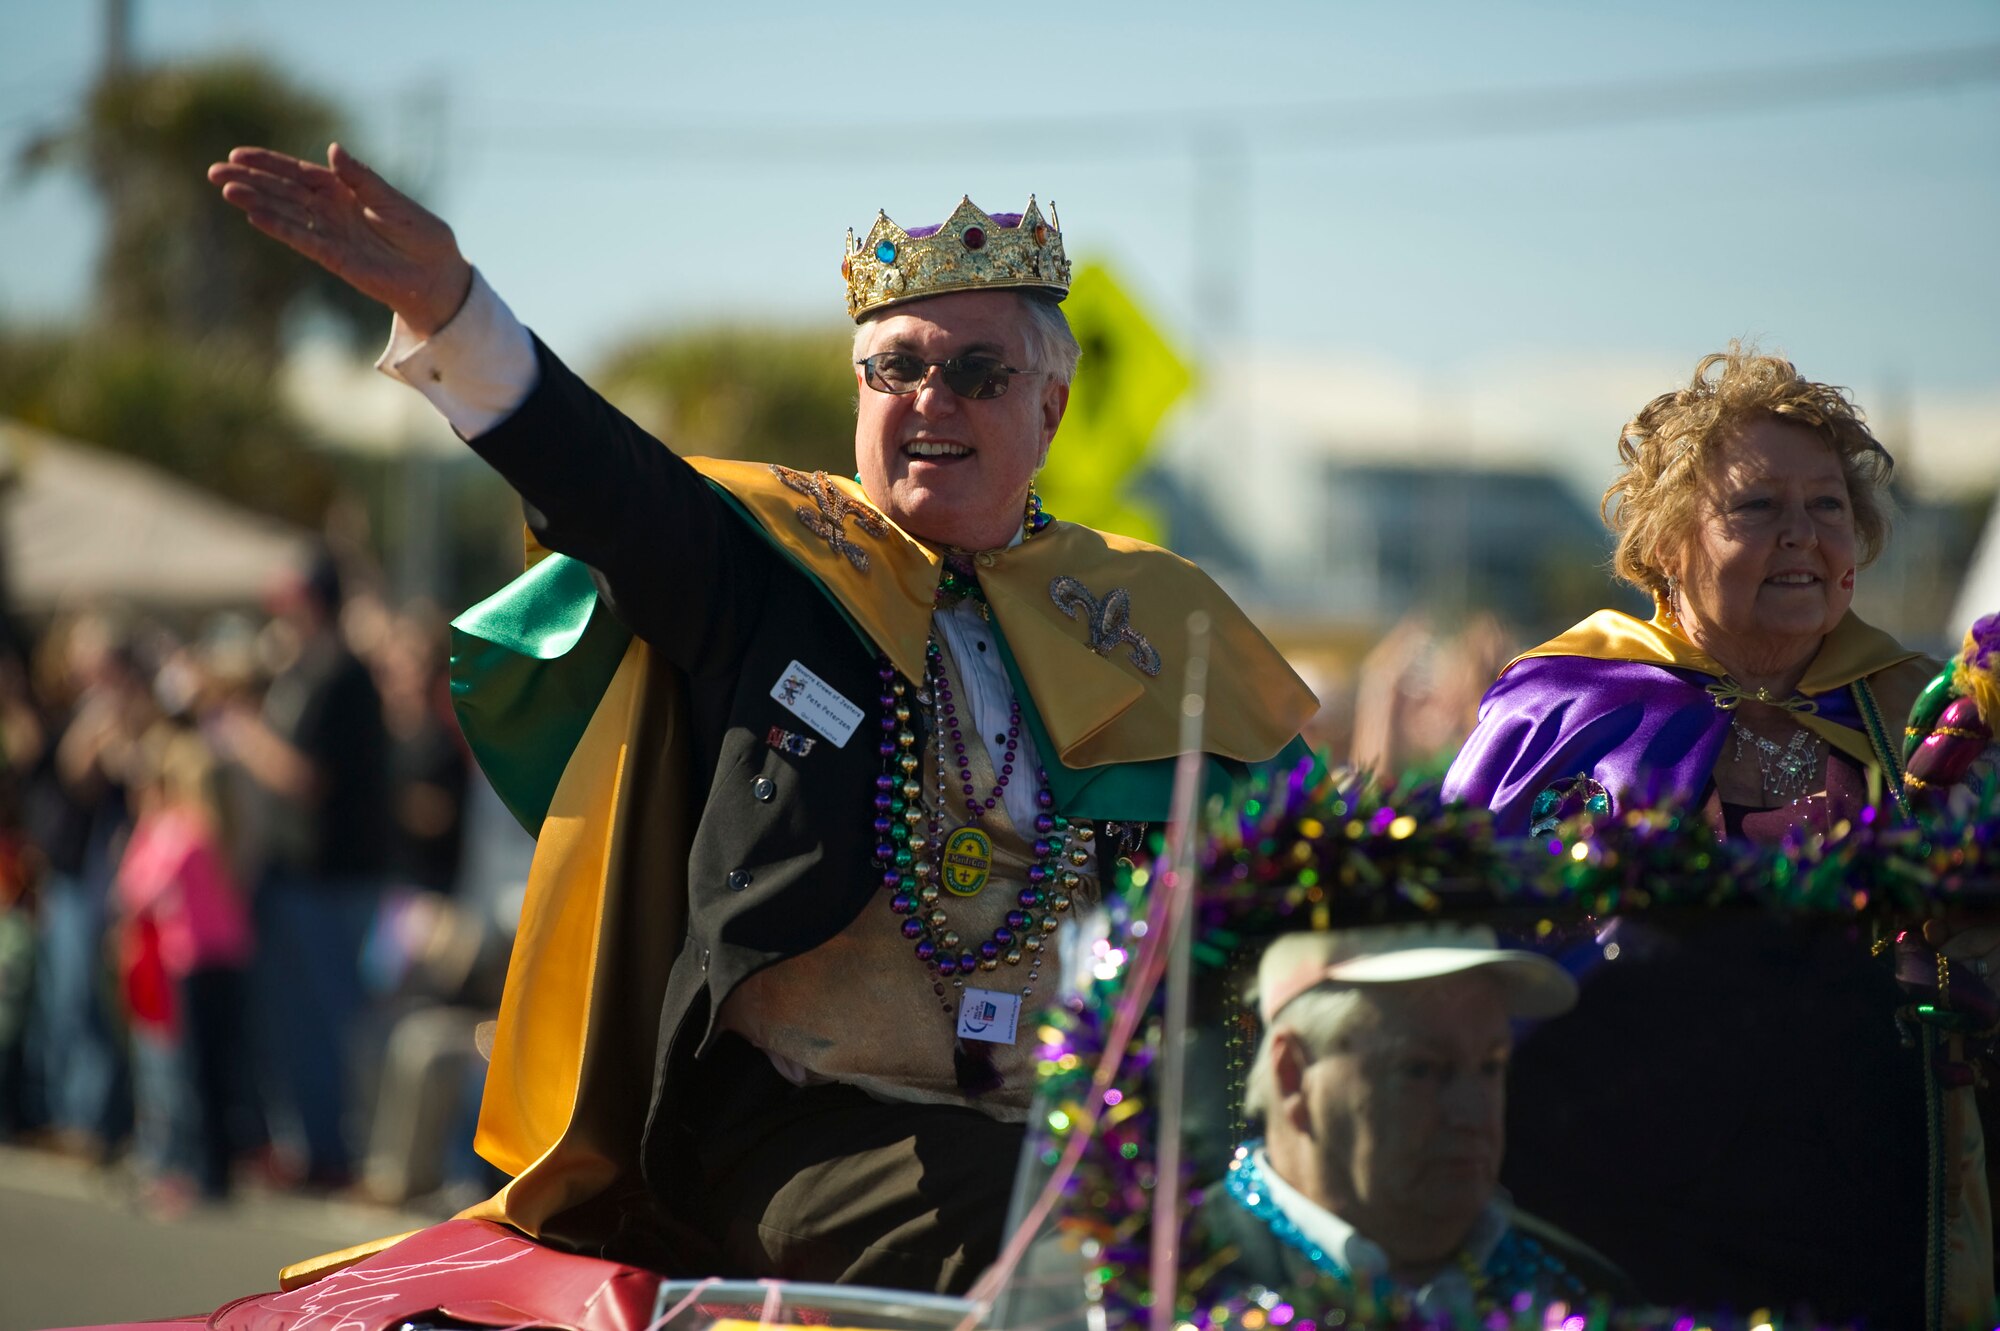 Pete Peterzen, king of the 2013 Navarre Krewe of Jesters, waves while riding on a float in a mardi gras parade at Navarre Beach, Fla., Feb. 2, 2013. More than 25,000 citizens attended the parade and its festivities. (U.S. Air Force photo / Tech. Sgt. Vanessa Valentine)